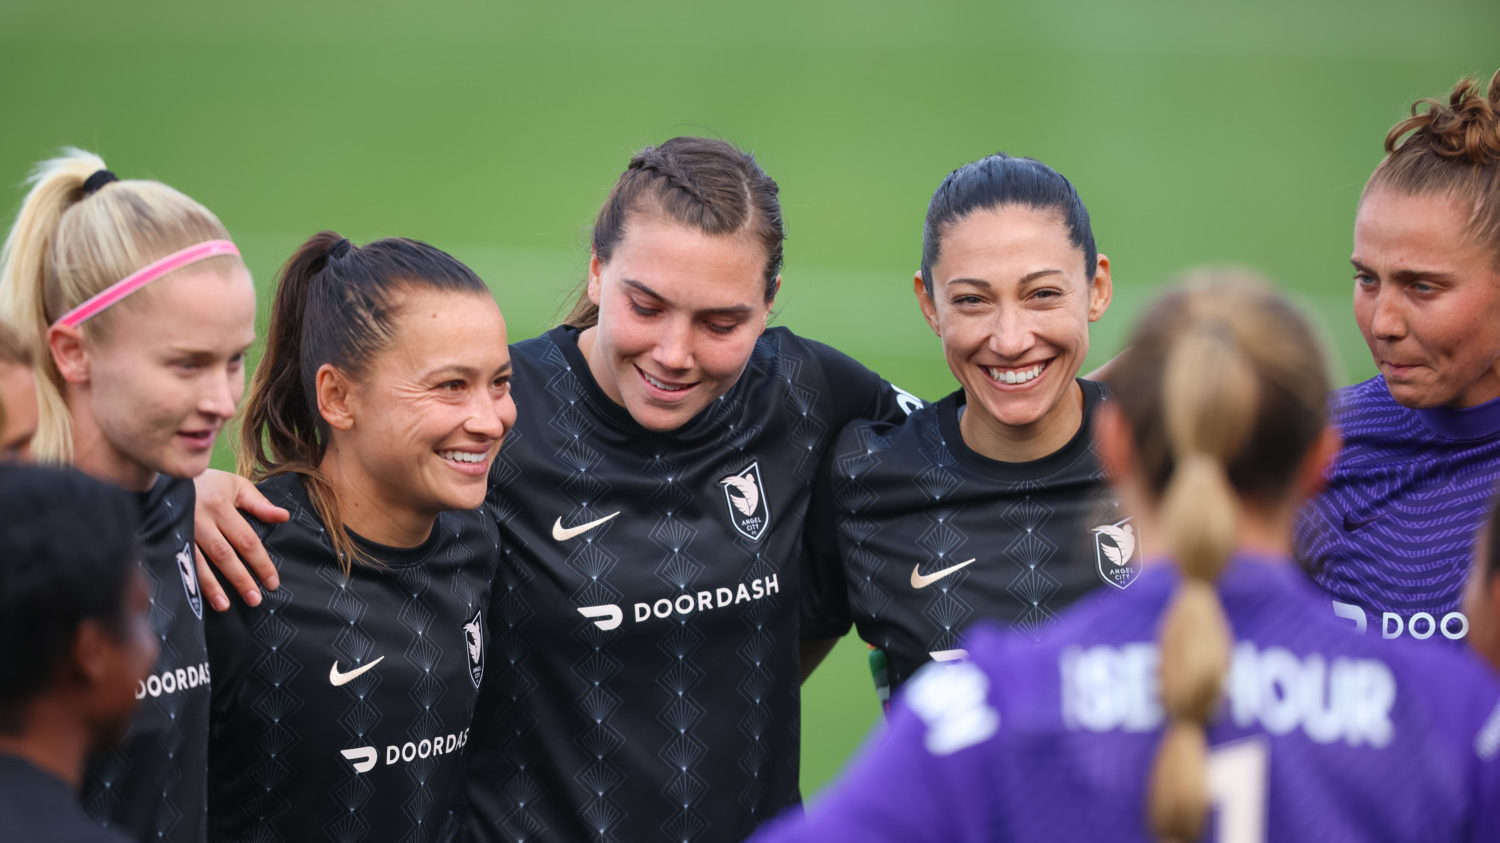 Angel City FC women's team to share LAFC venue when play begins in